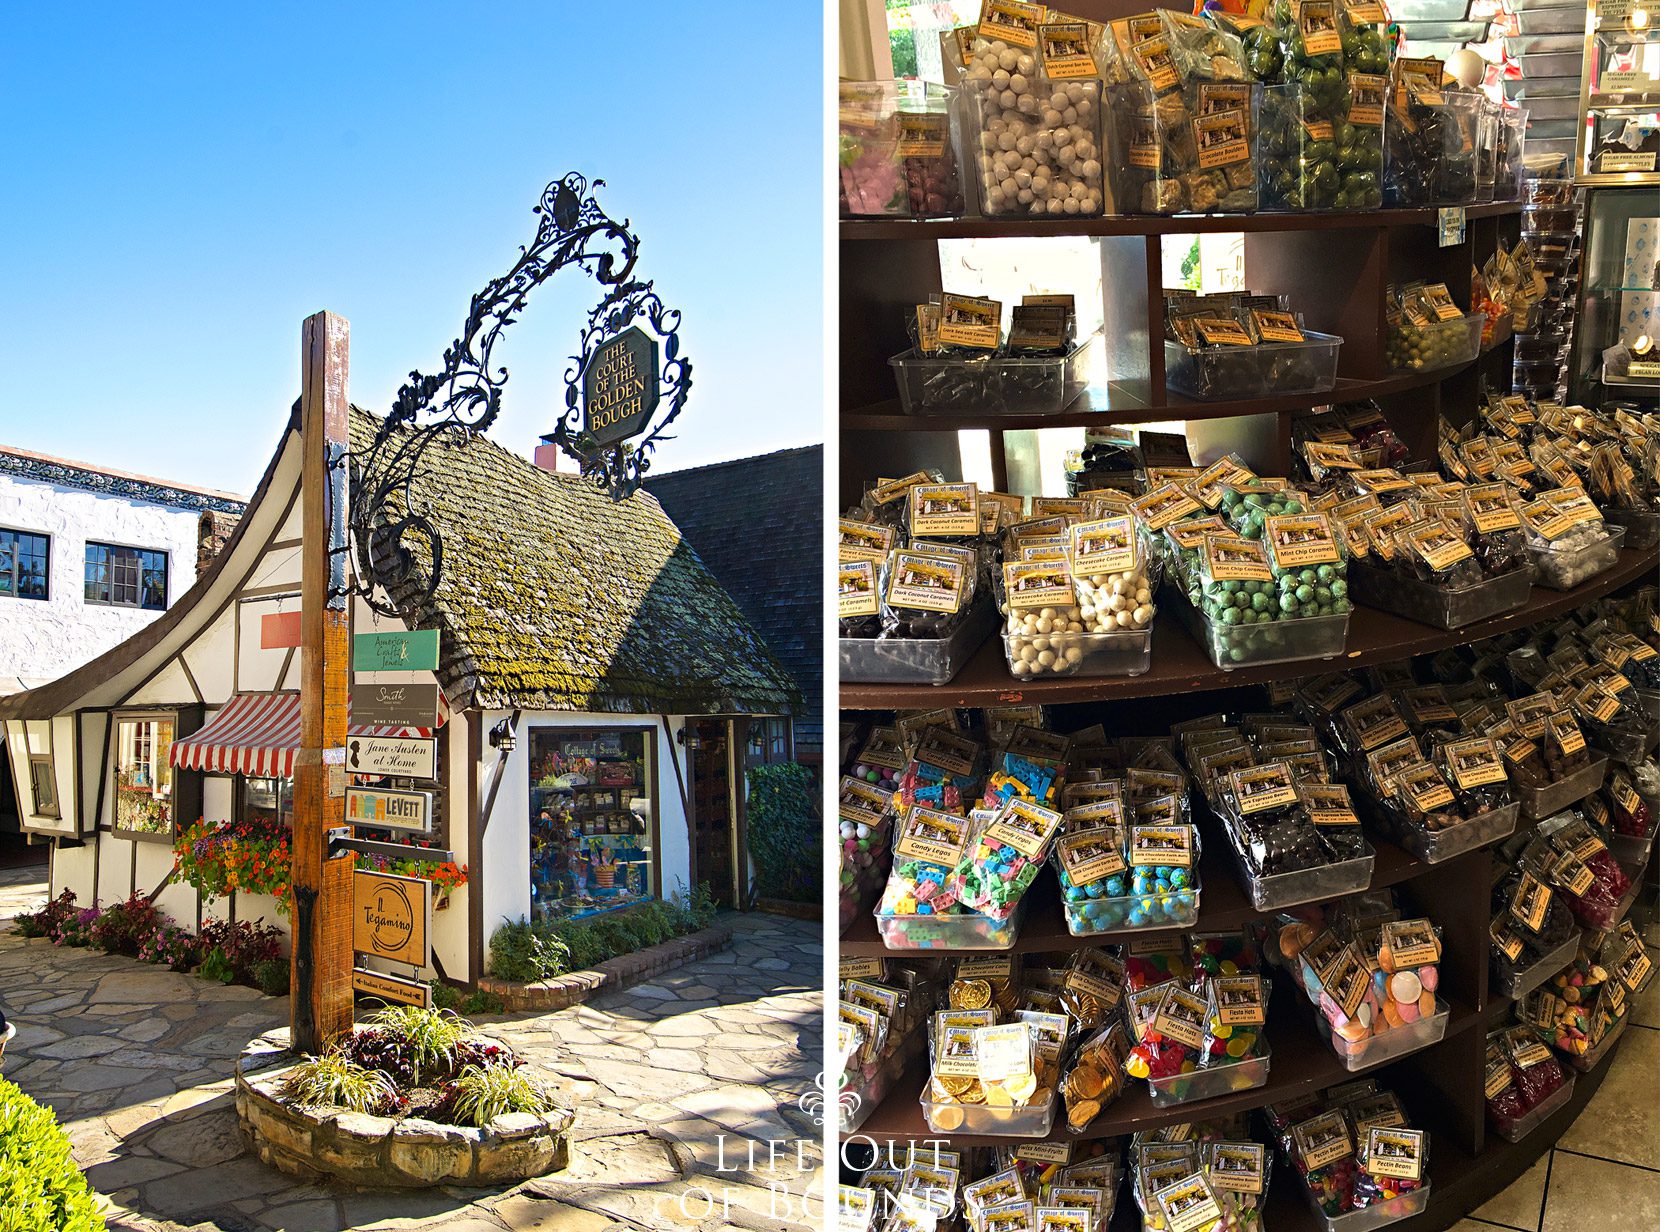 Cottage-of-Sweets-in-Carmel-by-the-Sea-California